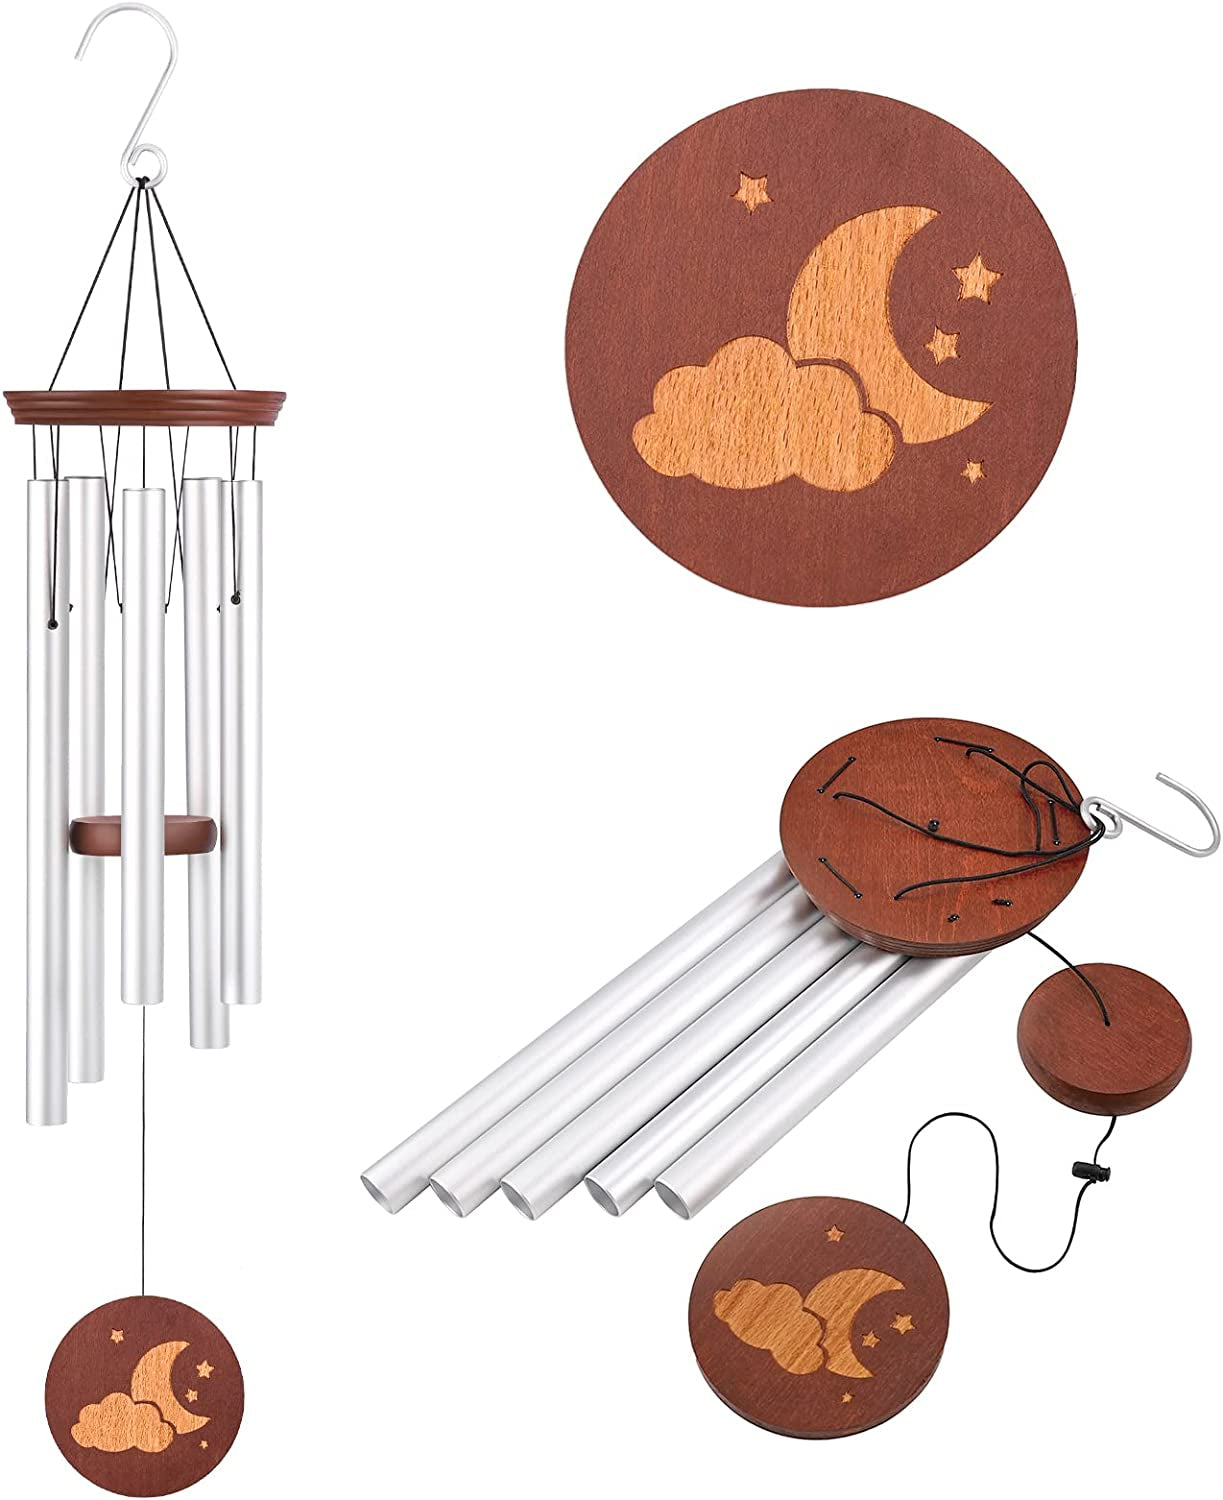 Famiry, Famiry Wind Chimes for outside Deep Tone, 36 Inch Large Sympathy Wind Chimes Outdoor Clearance, Memorial Wind Chimes with 5 Metal Tubes & Hook, Outdoor Decor for Garden, Patio, Yard, Home